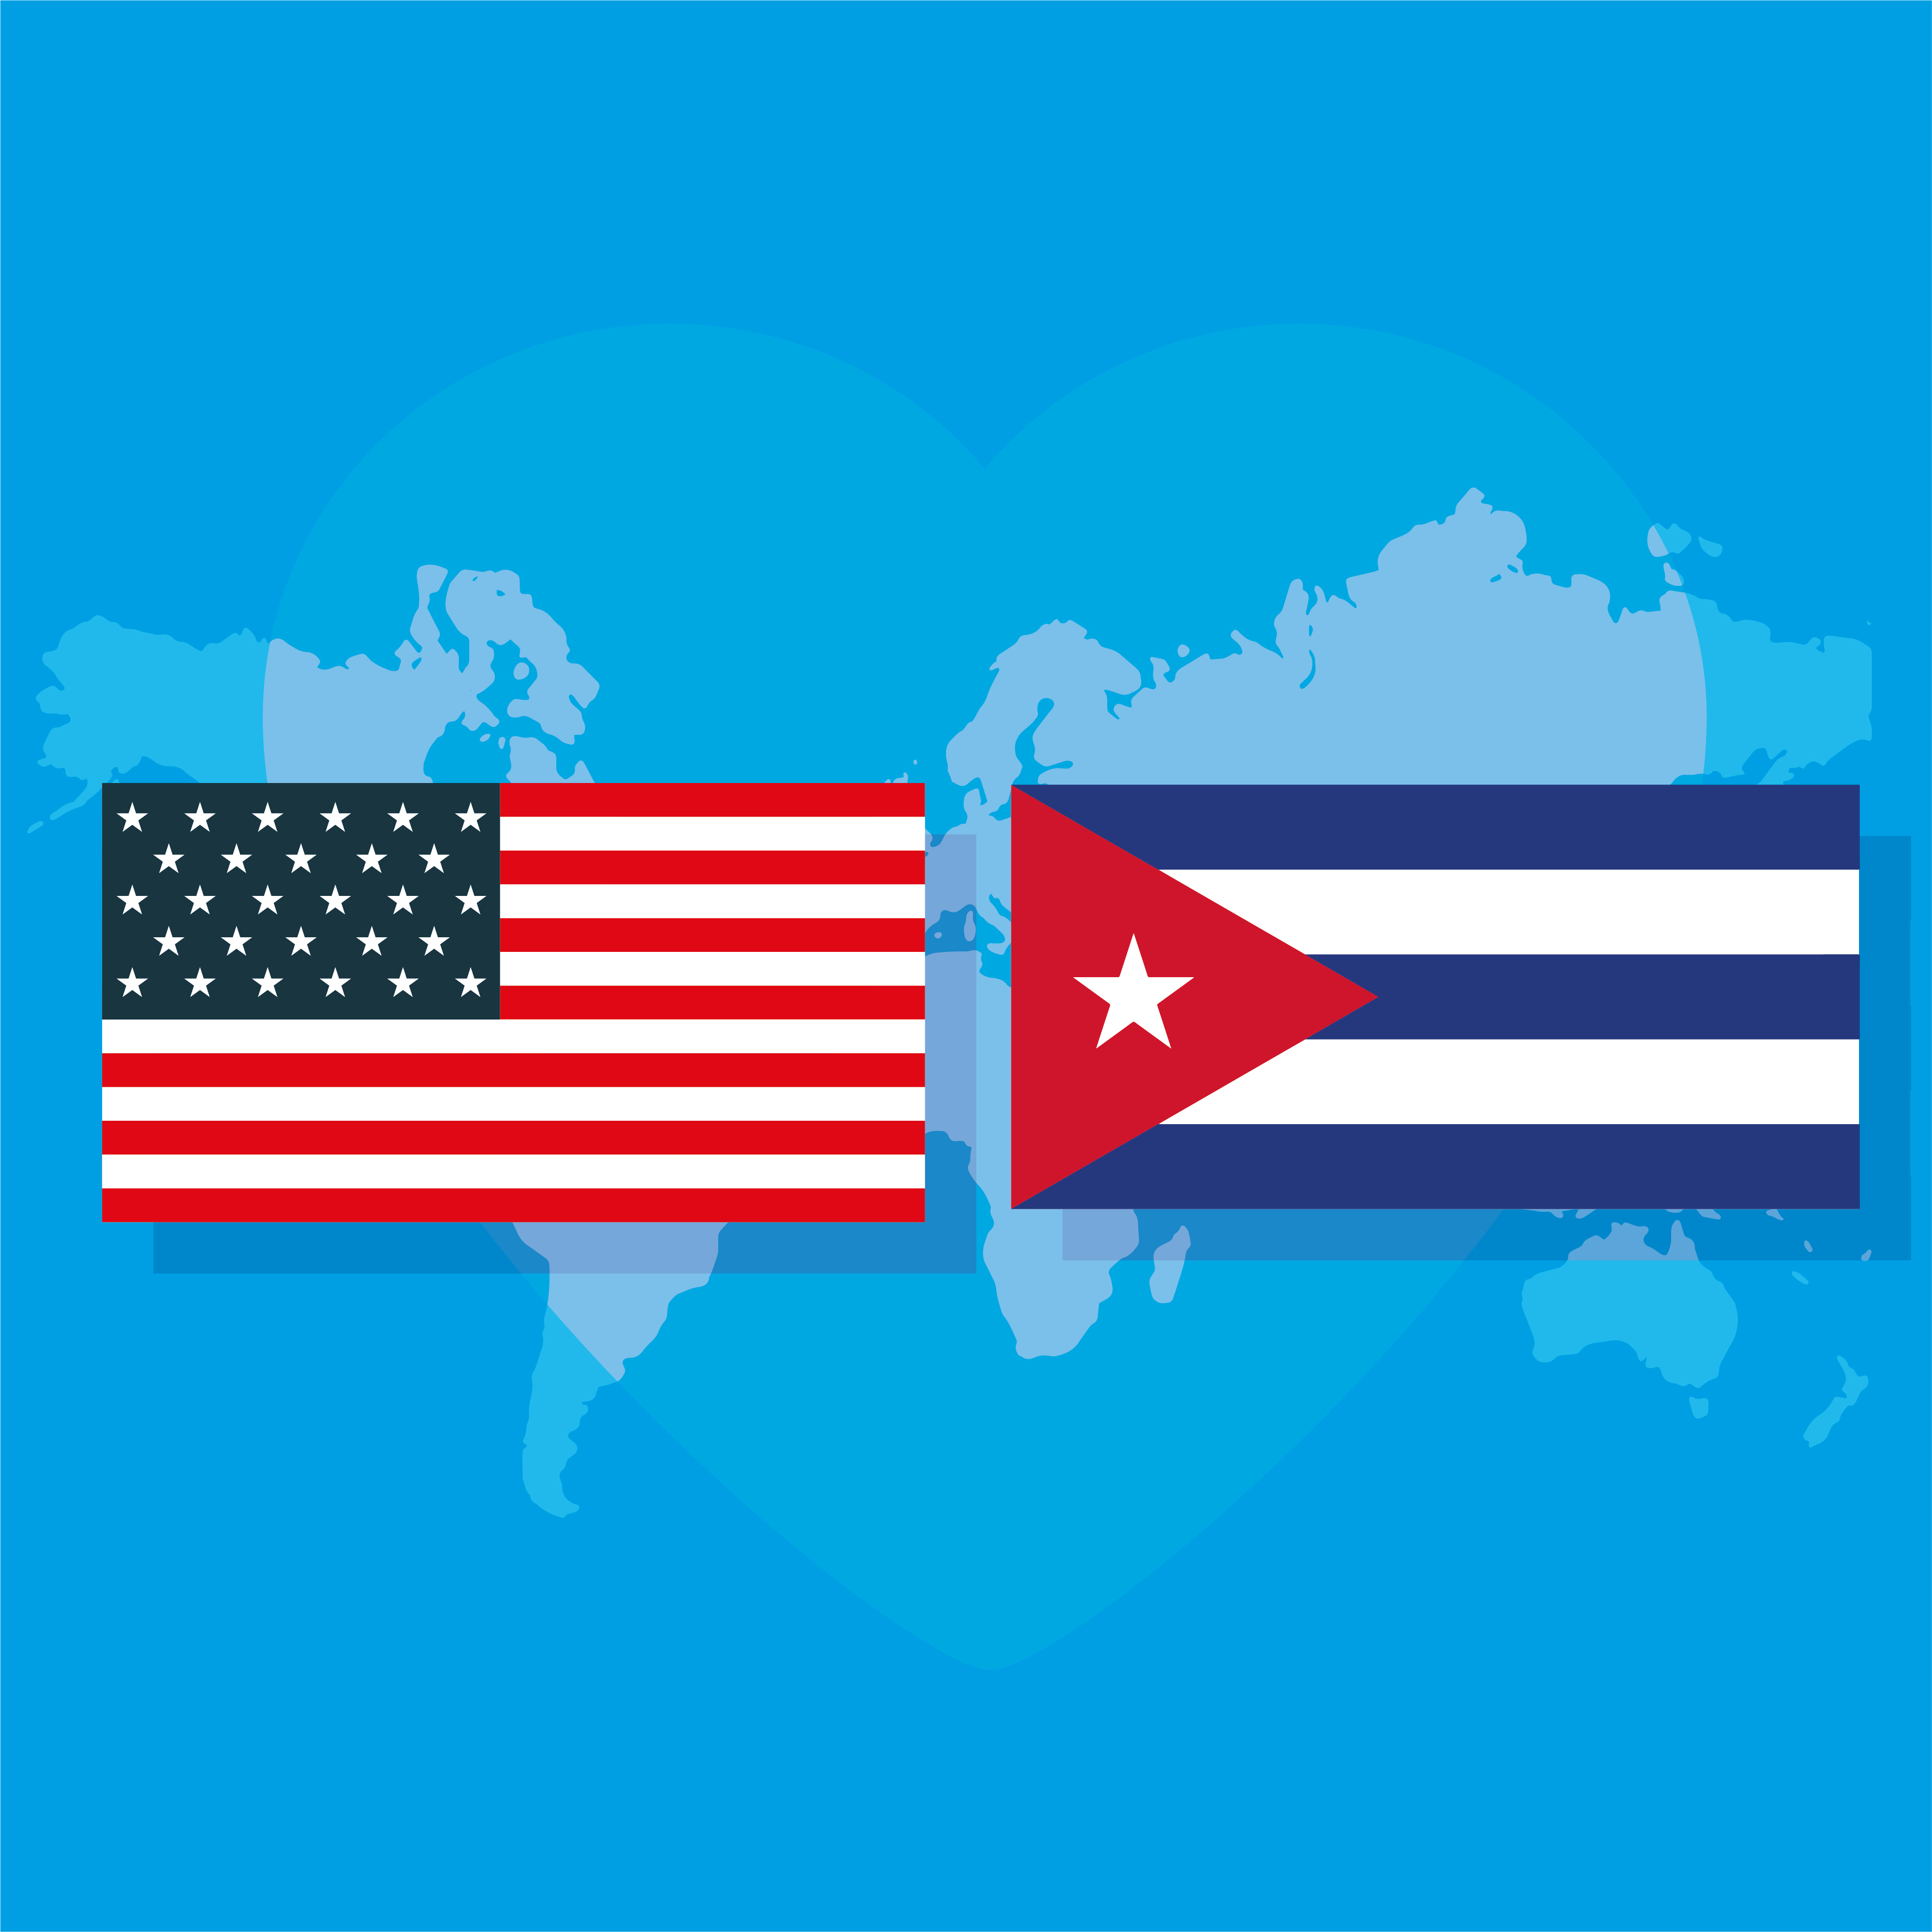 Change in Policy for Cuban Immigrants